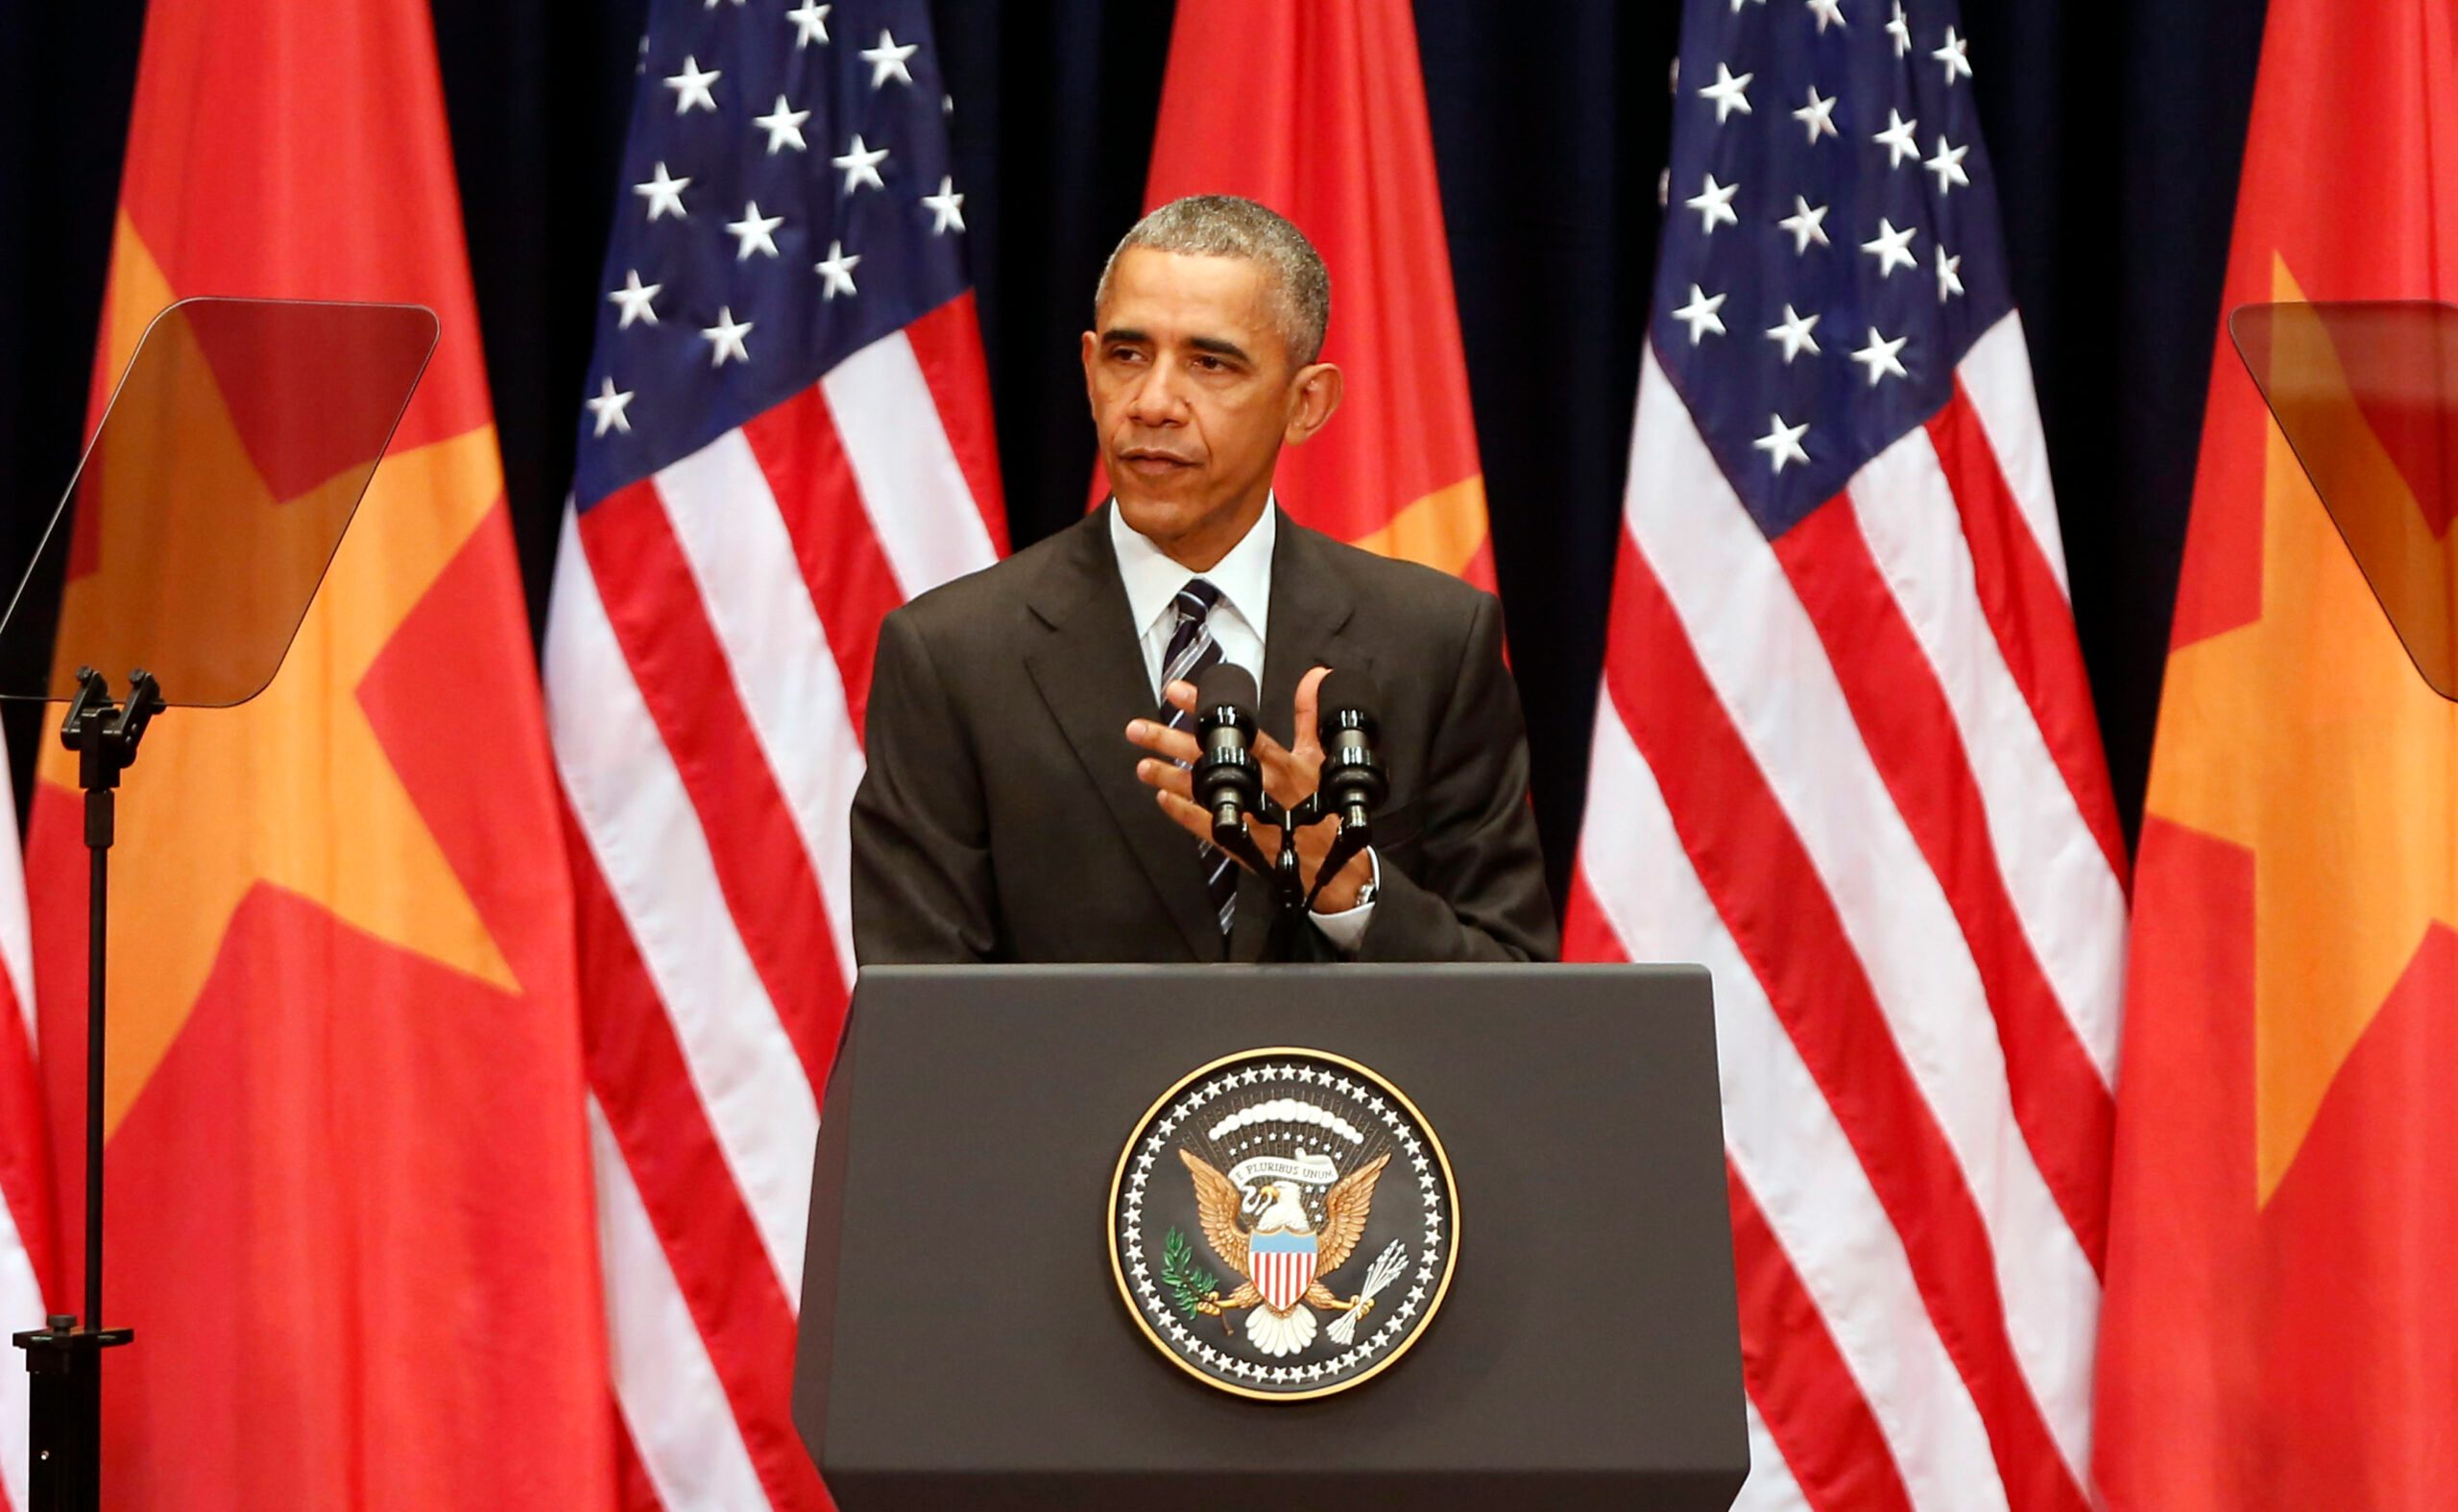 Obama implores Vietnam to embrace human rights